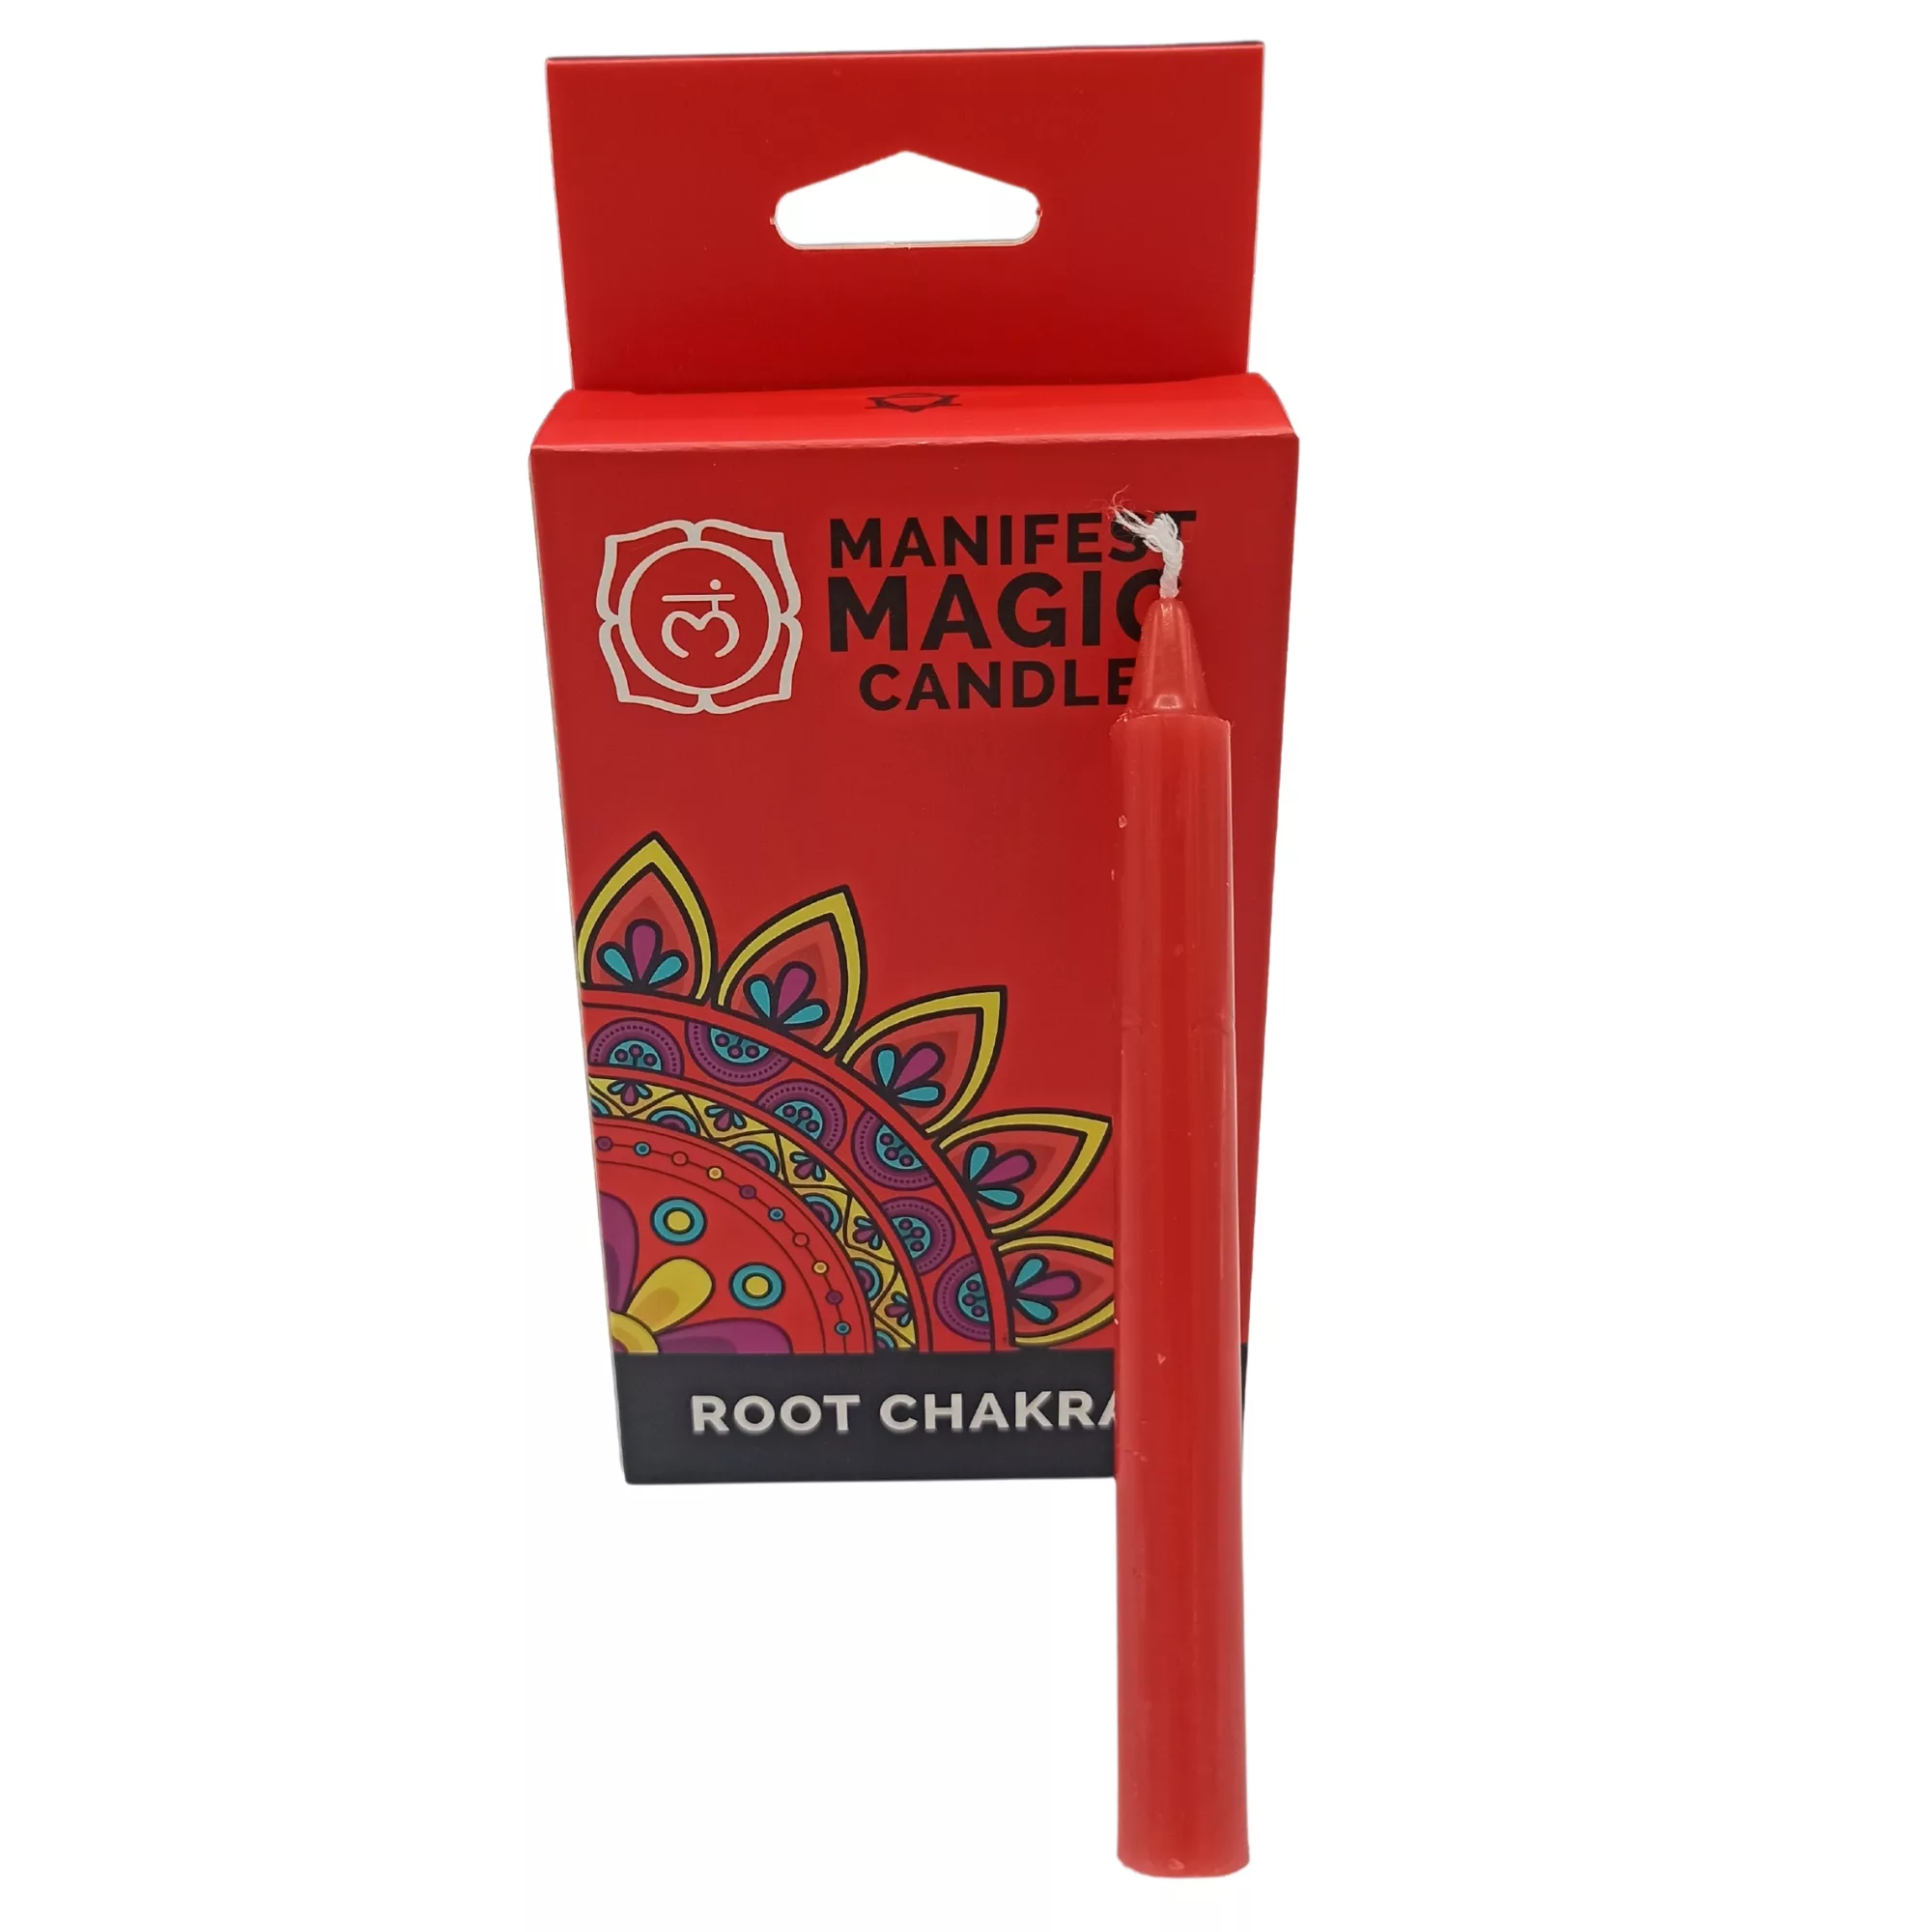 Manifest Magic Candles (pack of 12) – Red – Root Chakra